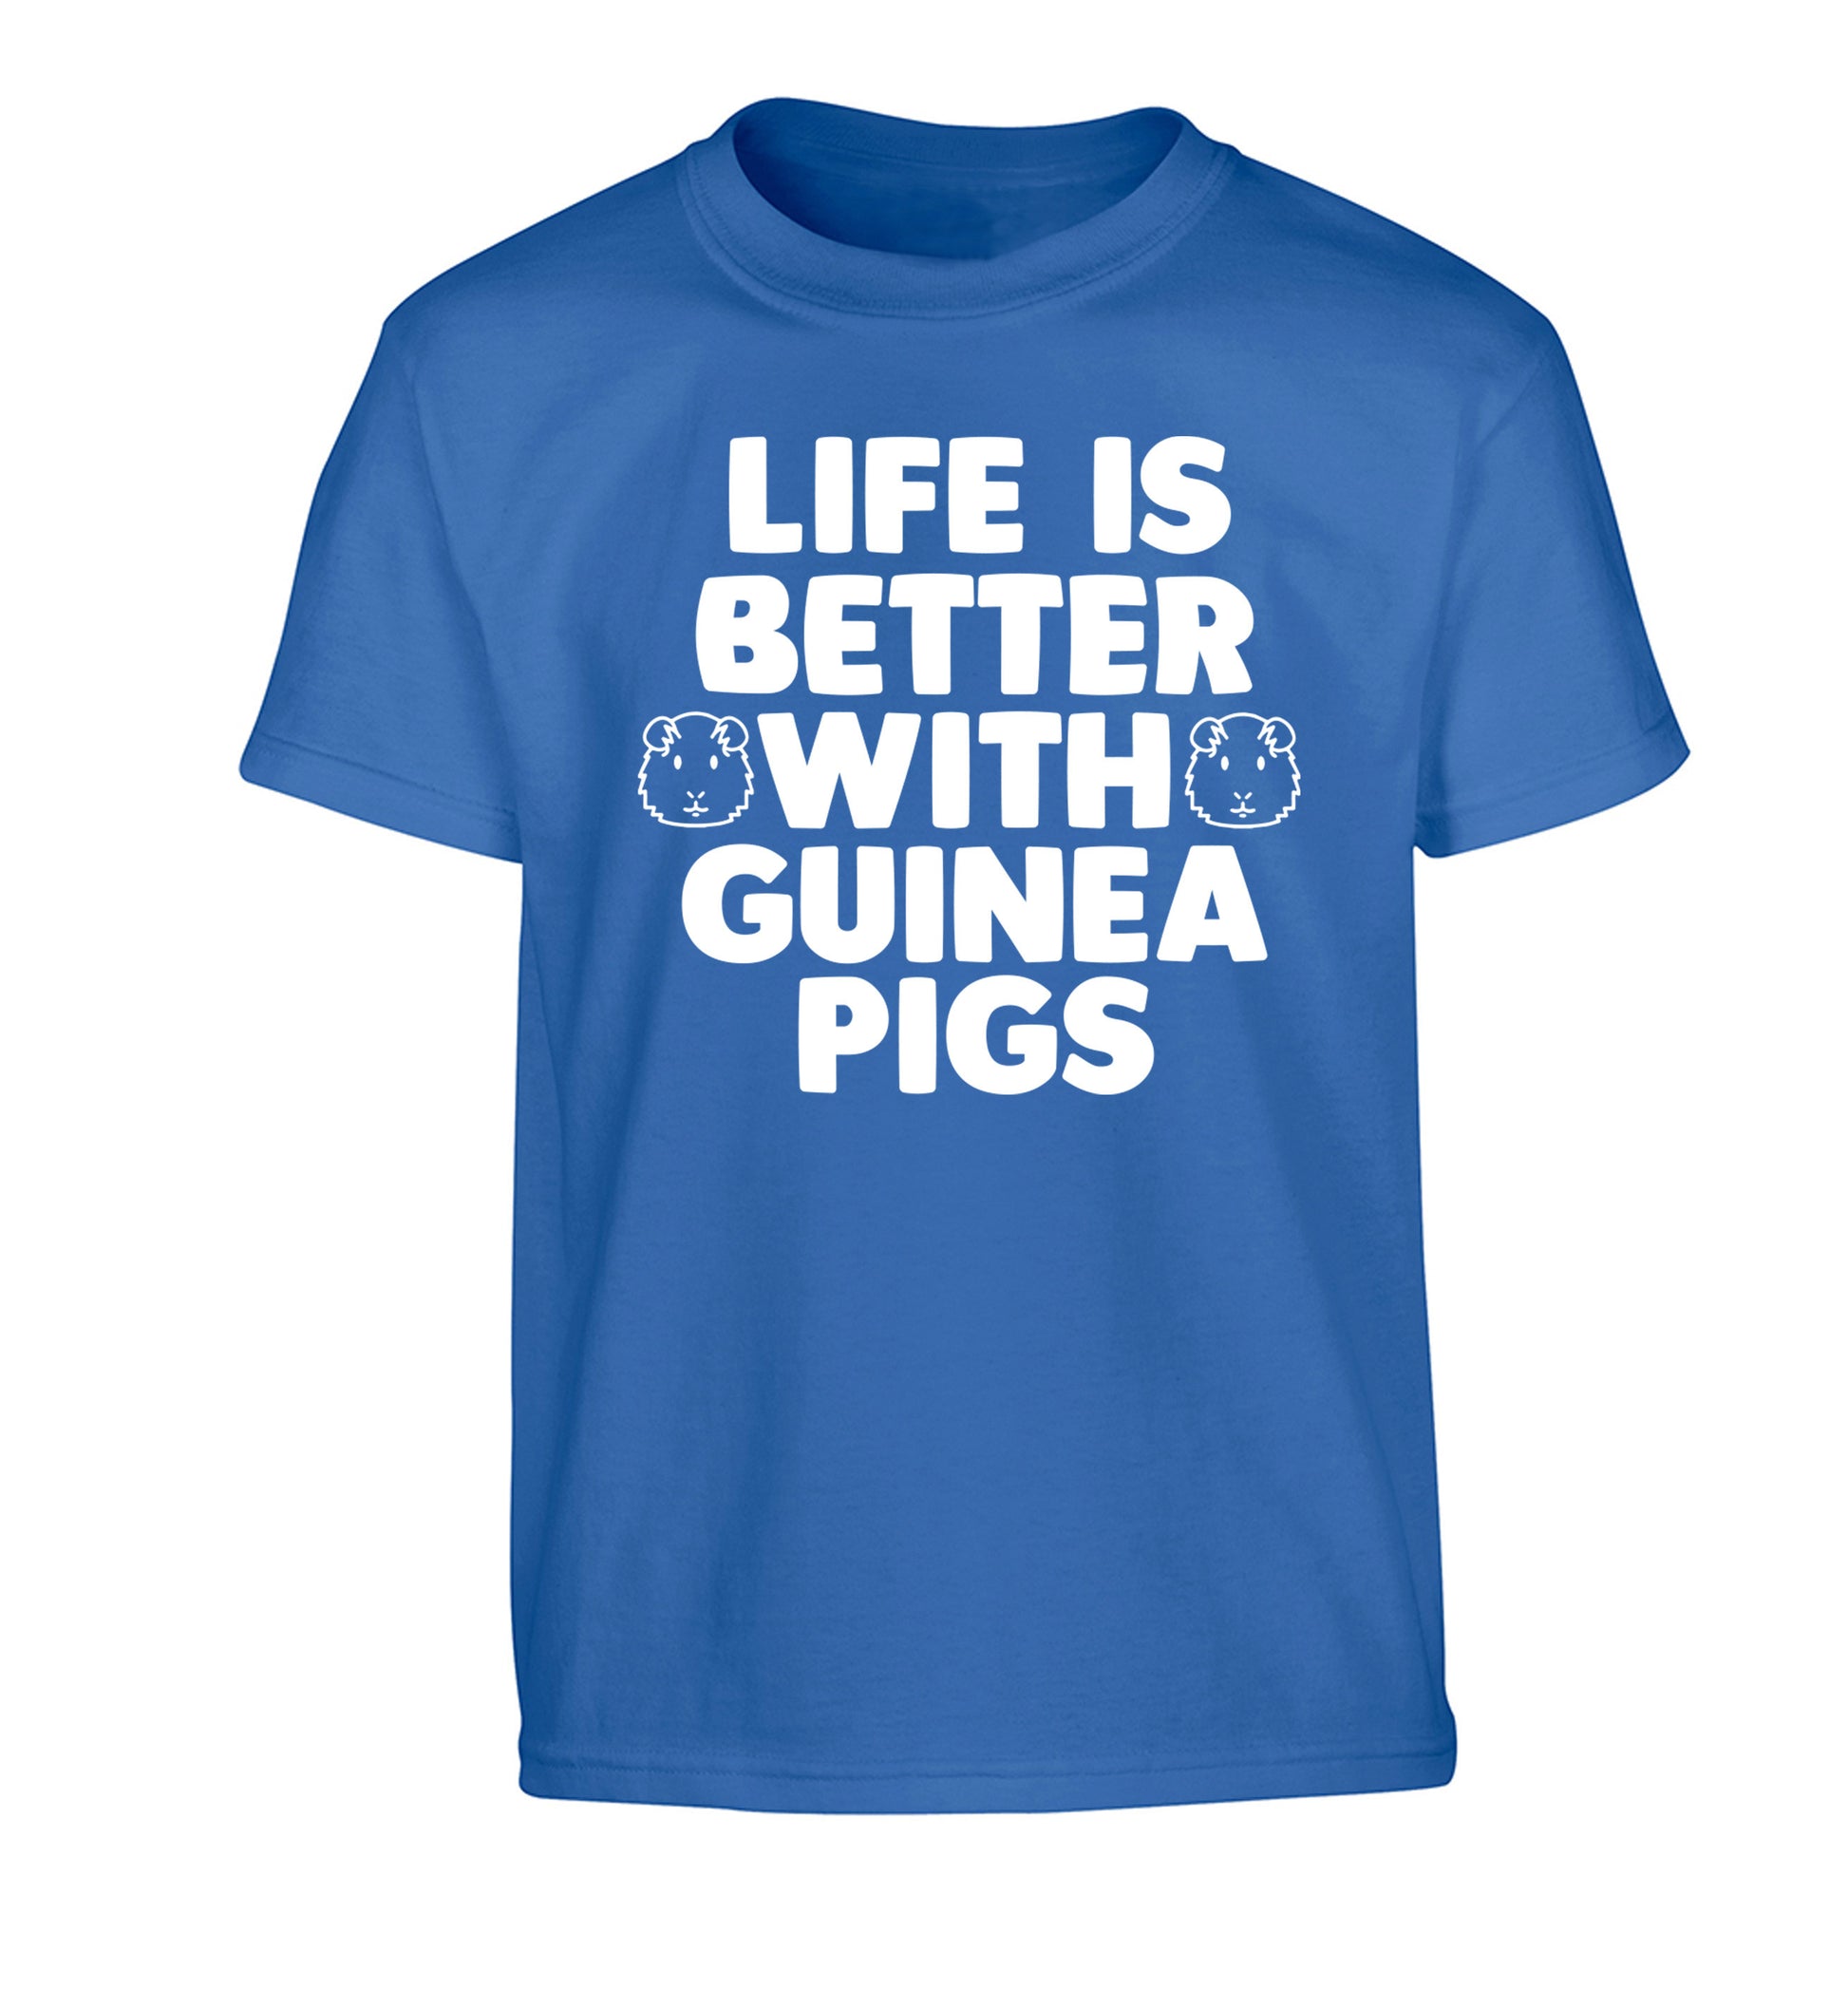 Life is better with guinea pigs Children's blue Tshirt 12-14 Years